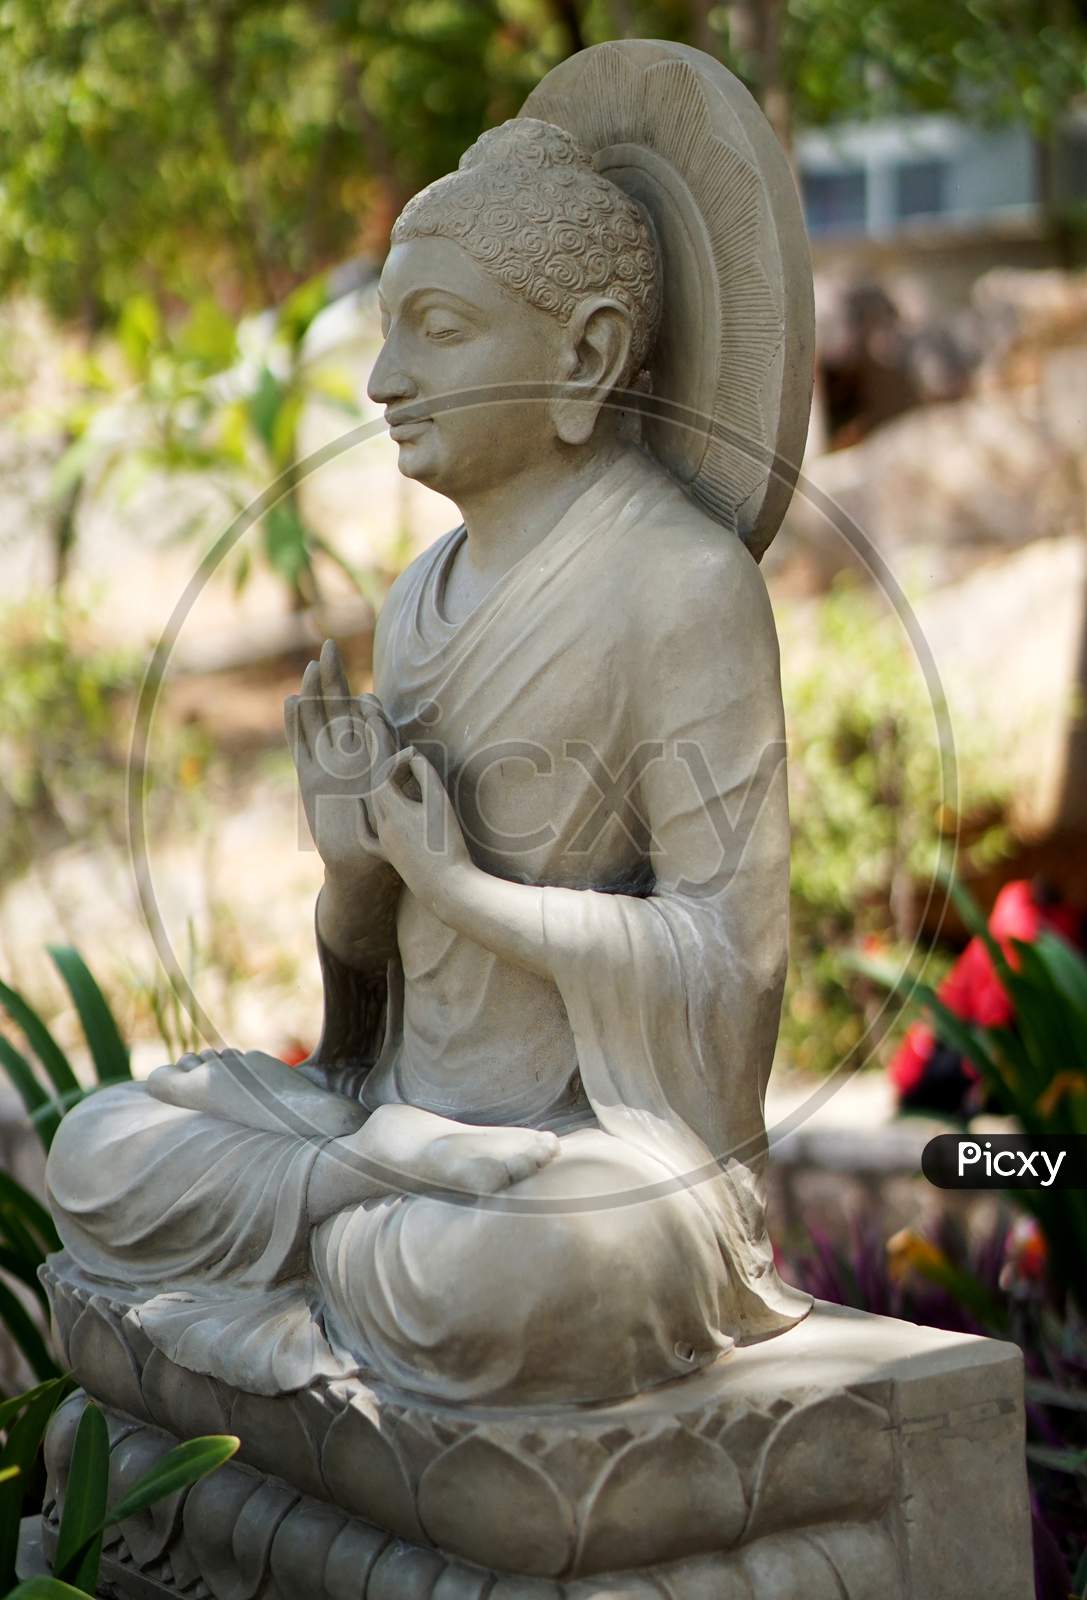 View Of Stone Carving Of God Buddha In Meditating Pose Under The Tree,In An Indian Monastry